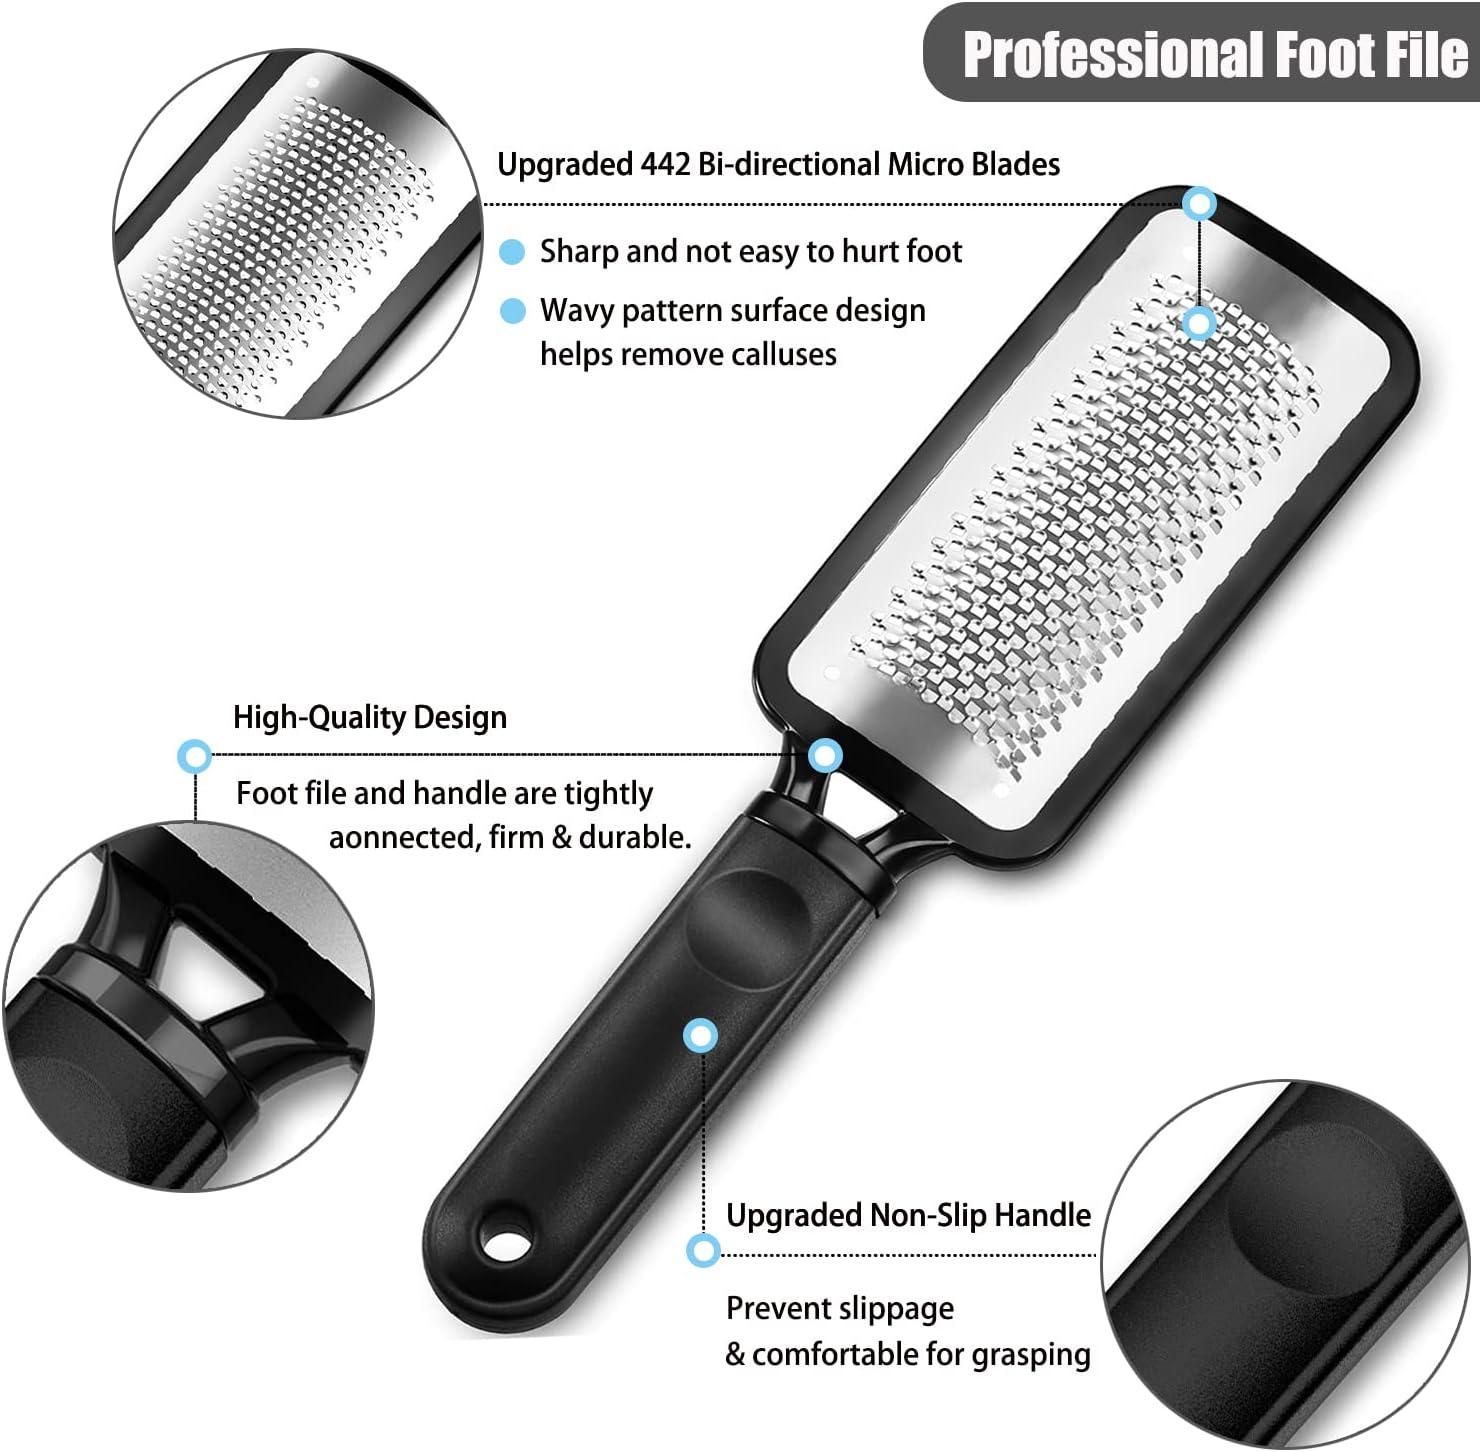  Colossal Foot rasp Foot File and Callus Remover. Best Foot  Care Pedicure Metal Surface Tool to Remove Hard Skin. Can be Used on Both  Wet and Dry feet, Surgical Grade